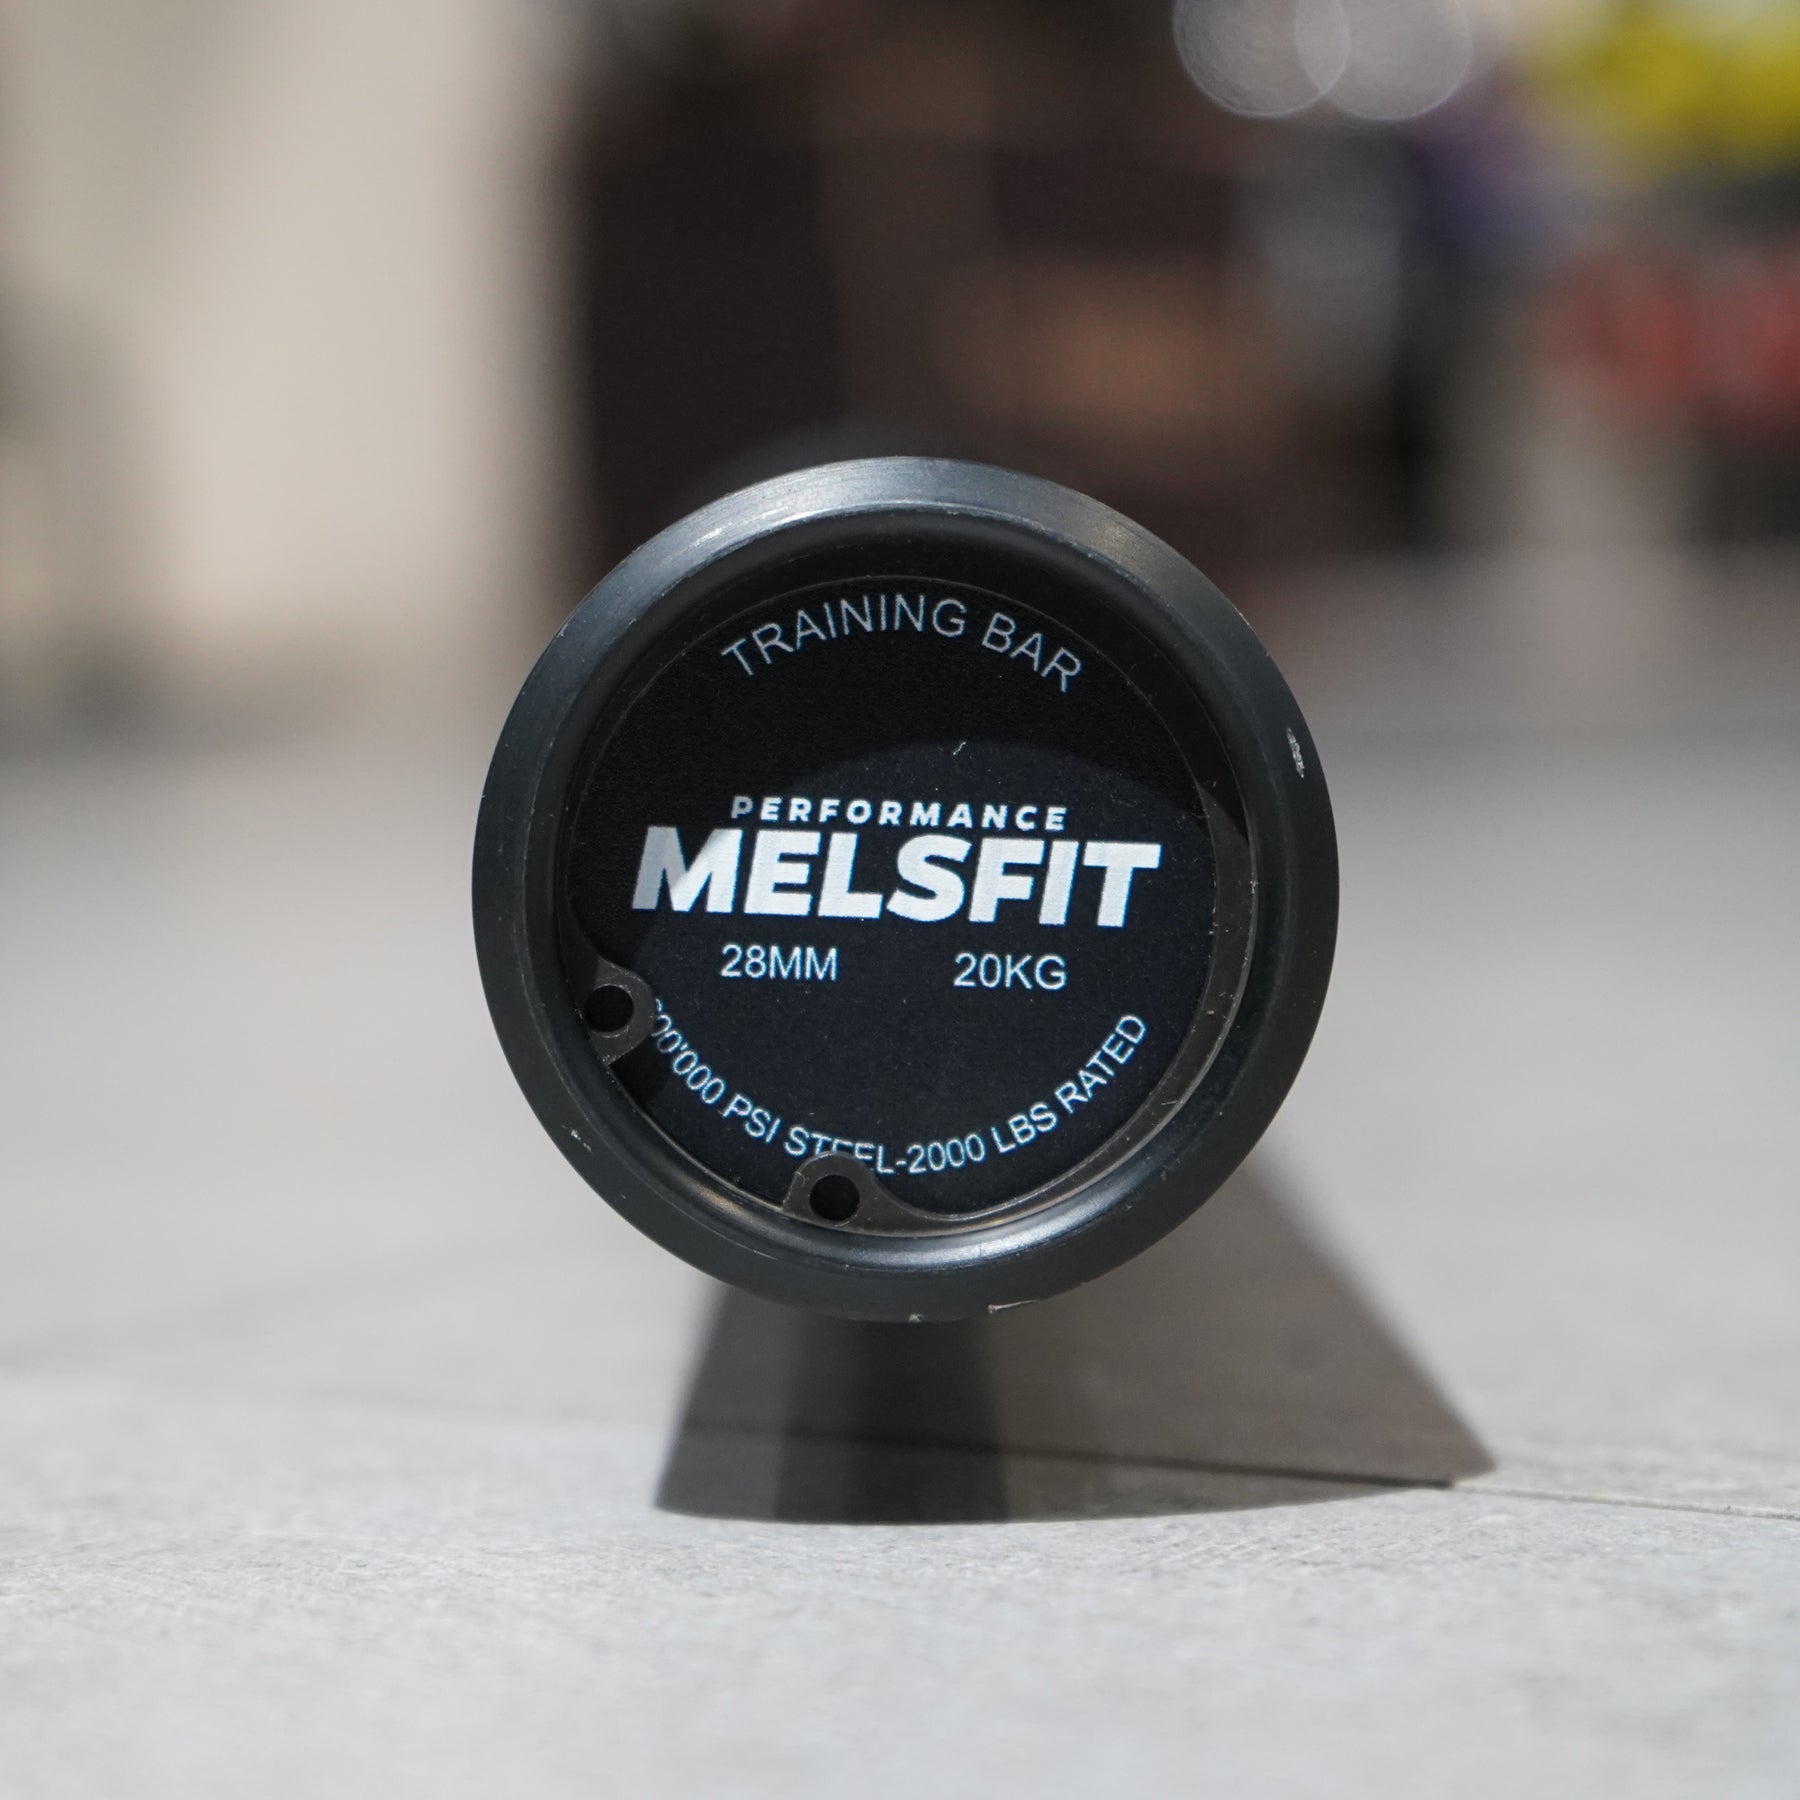 Cerakote Olympic Barbell - Melsfit performance